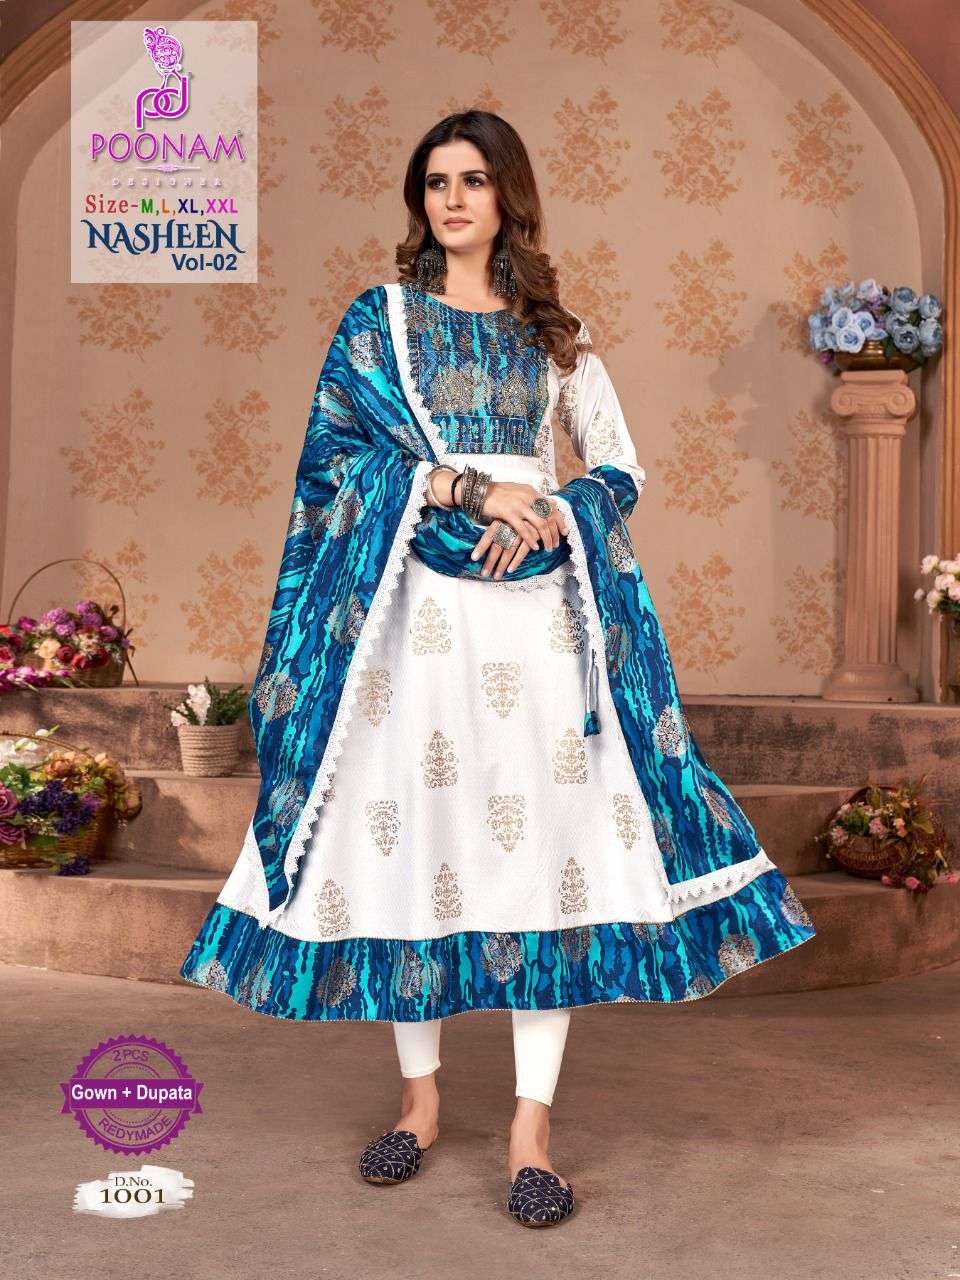 poonam nasheen vol 2 rayon long gown with dupatta concept